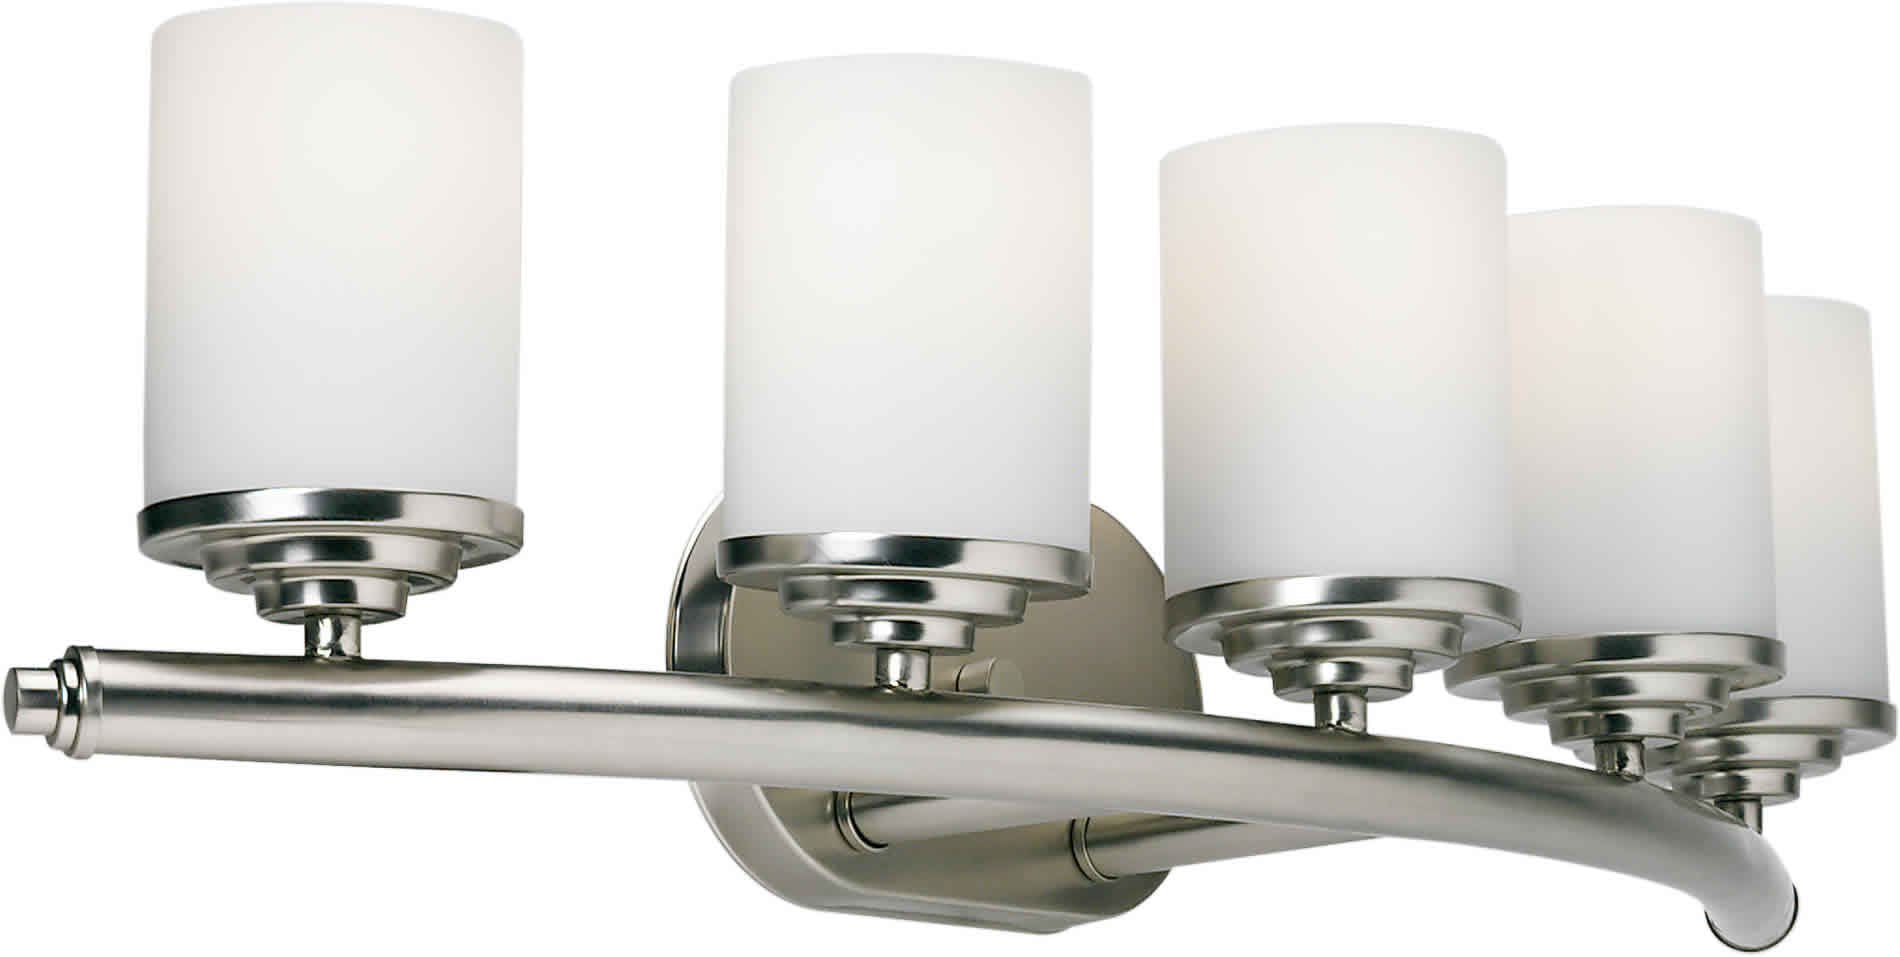 Forte Lighting 5105-01-55 Wall Sconce   Brushed Nickel 